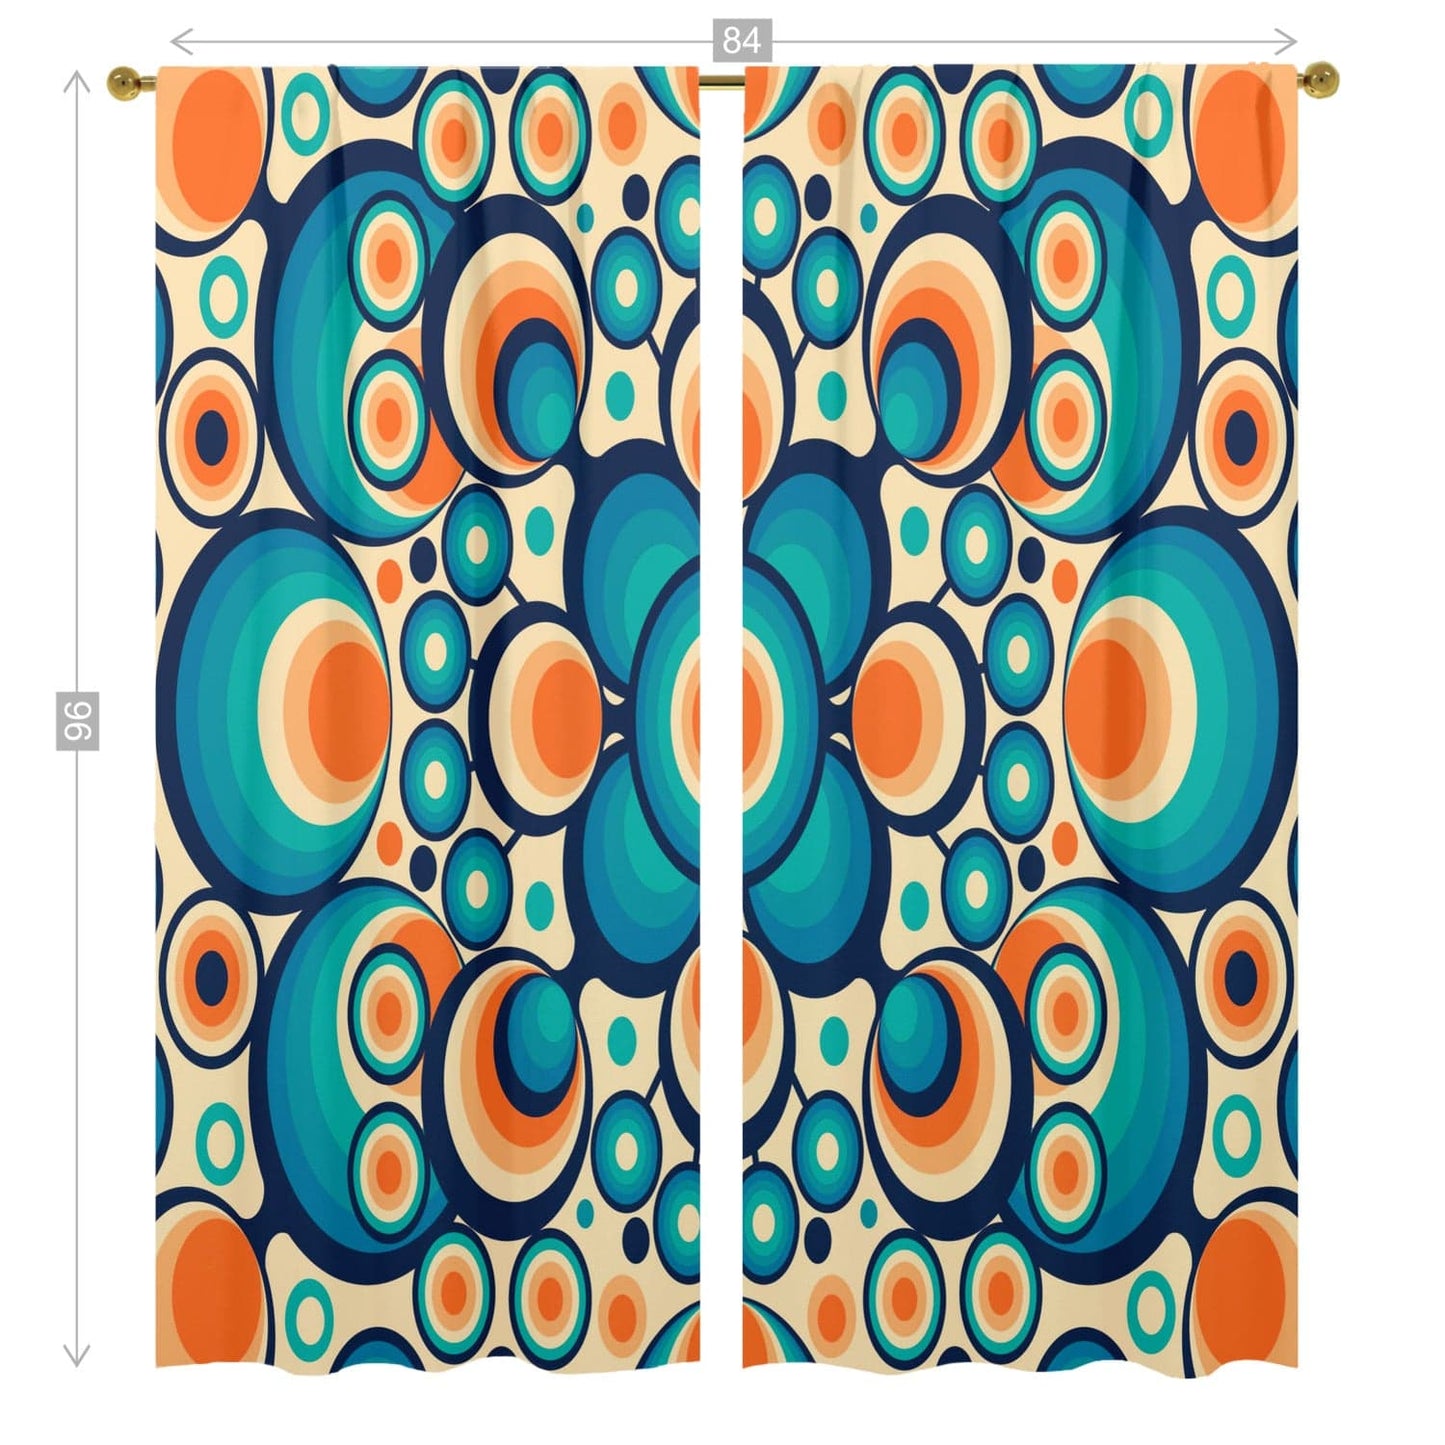 kate-mcenroe-nyc Groovy Hippie Retro Window Curtains (two panels) Curtains